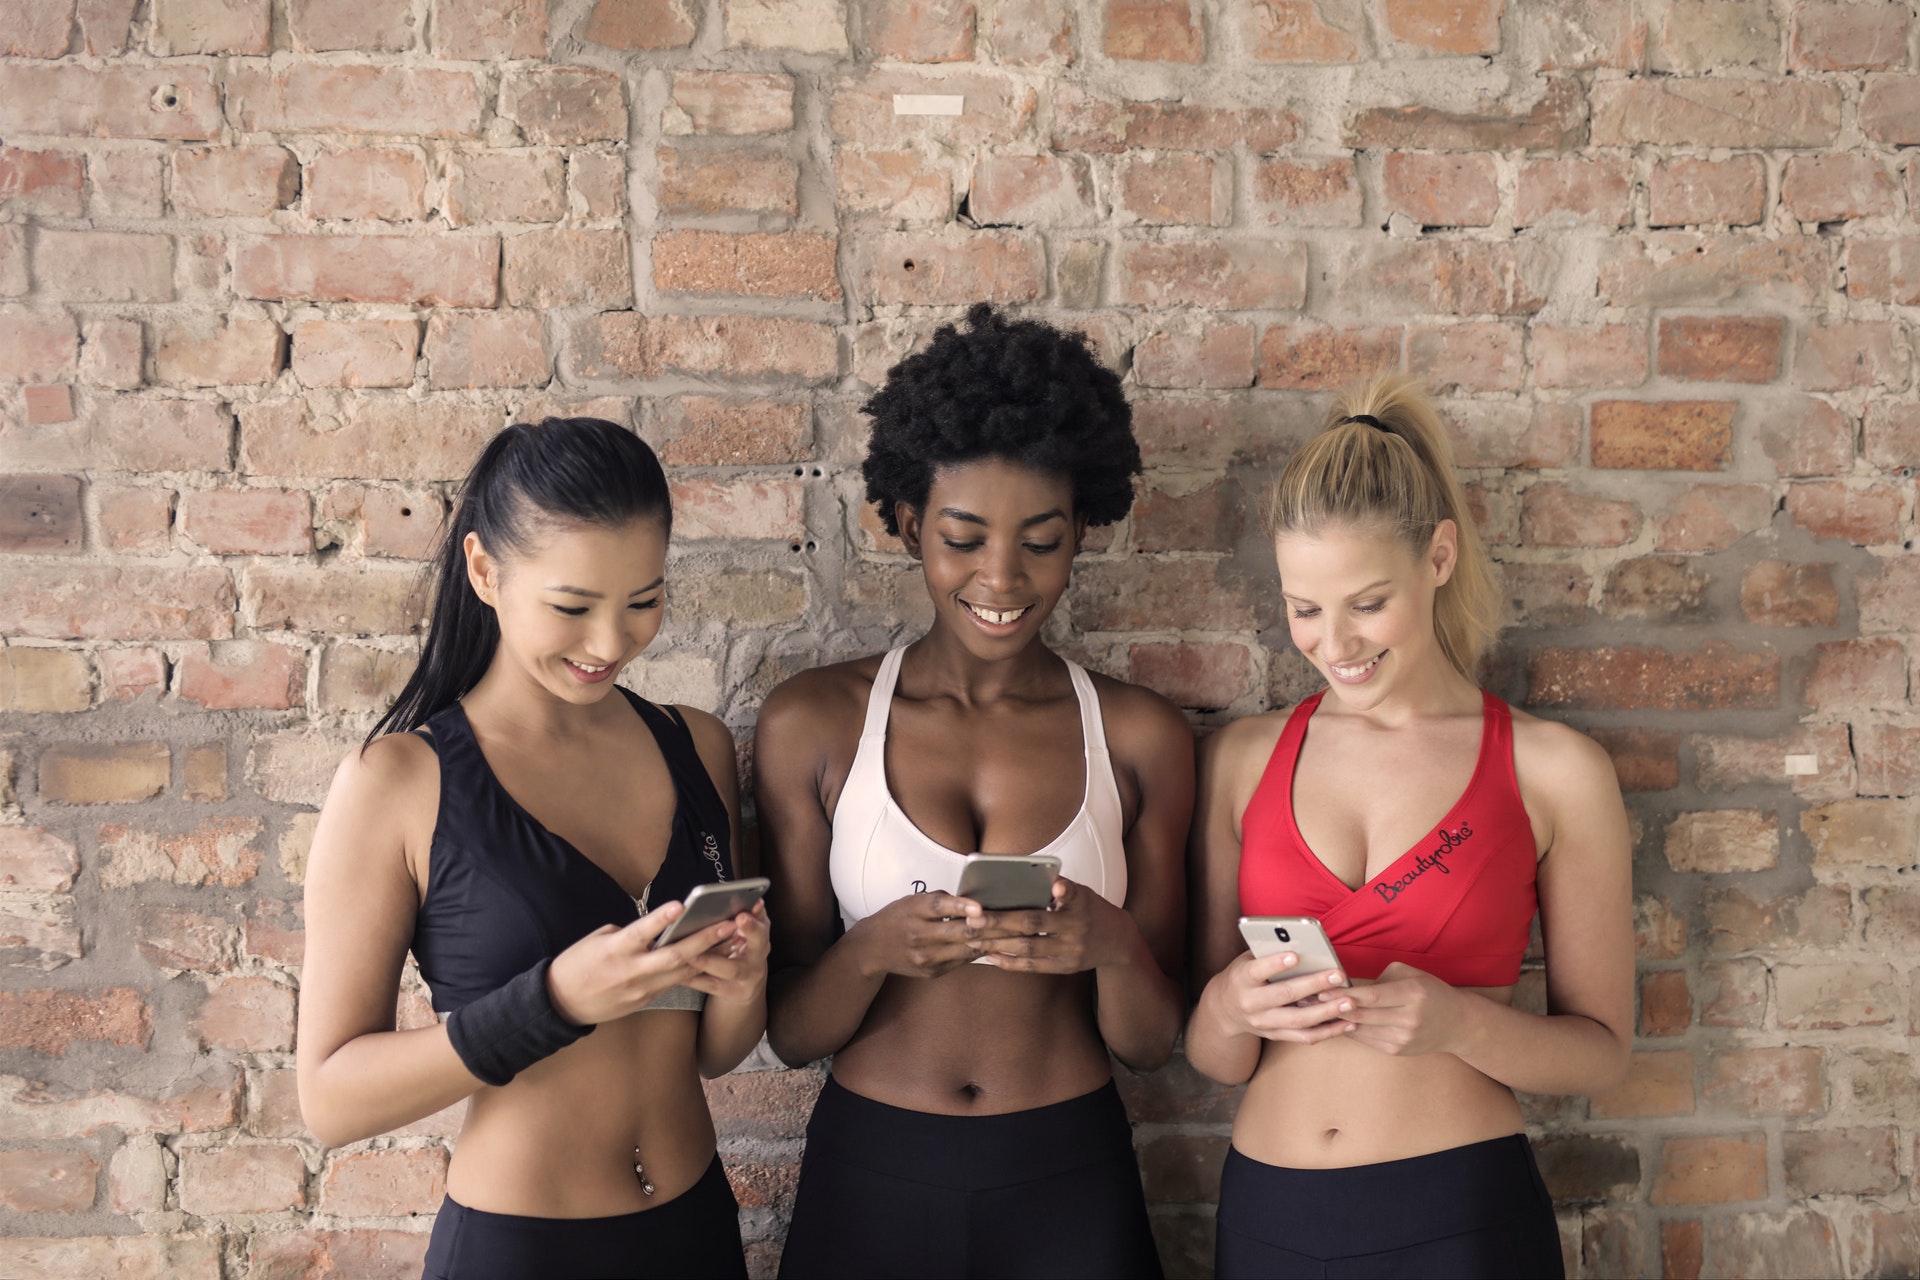 Increase Fitness Studio Revenue by Texting